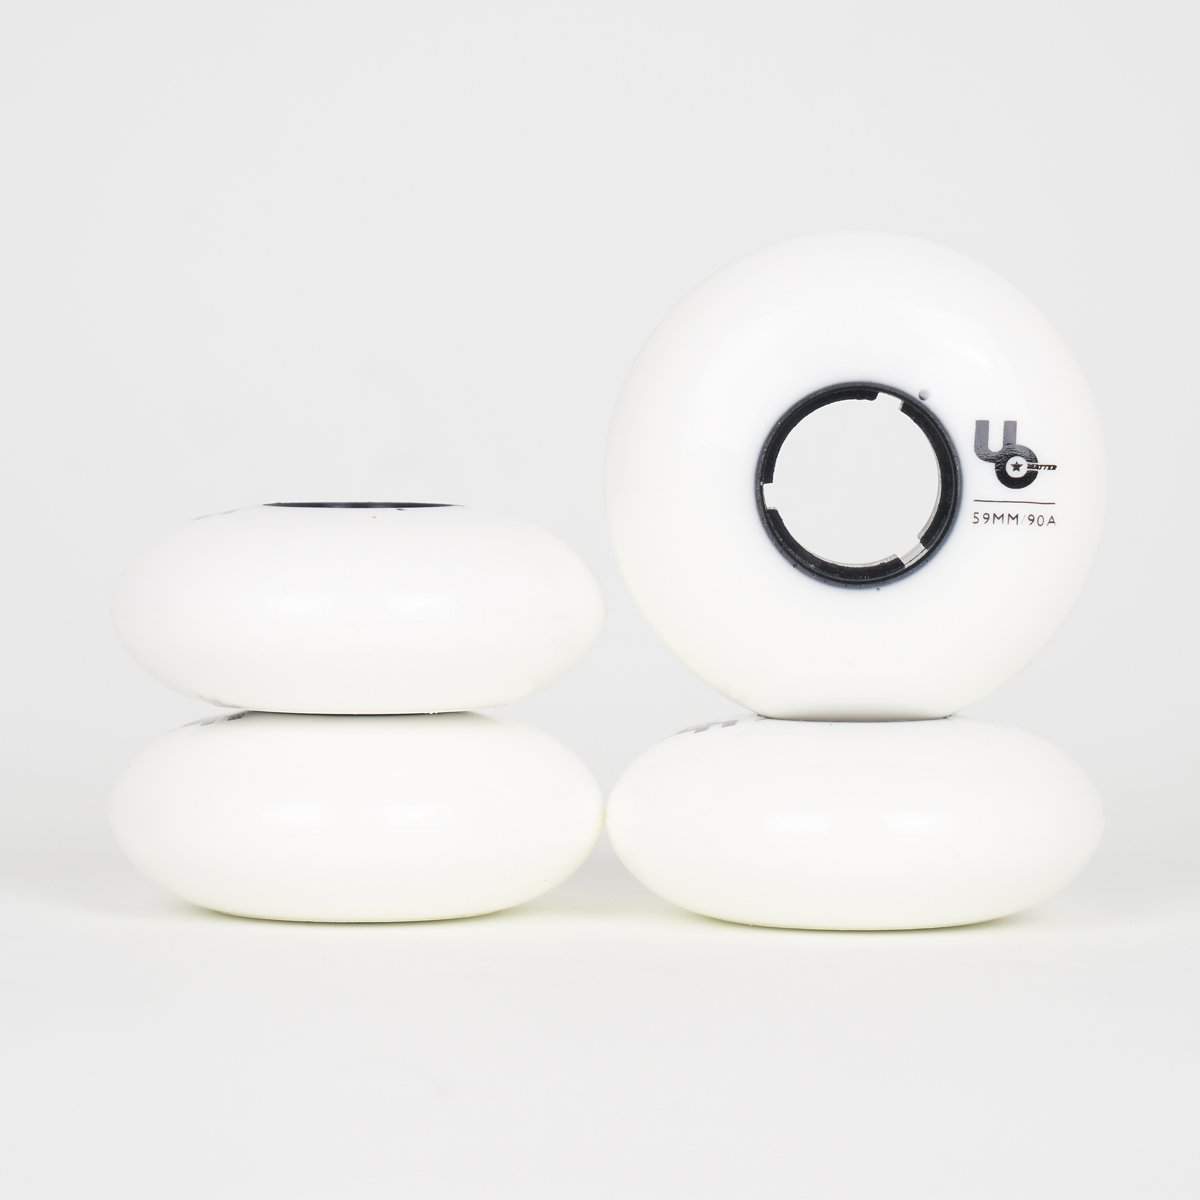 Undercover Team Wheels 59mm / 90a - White